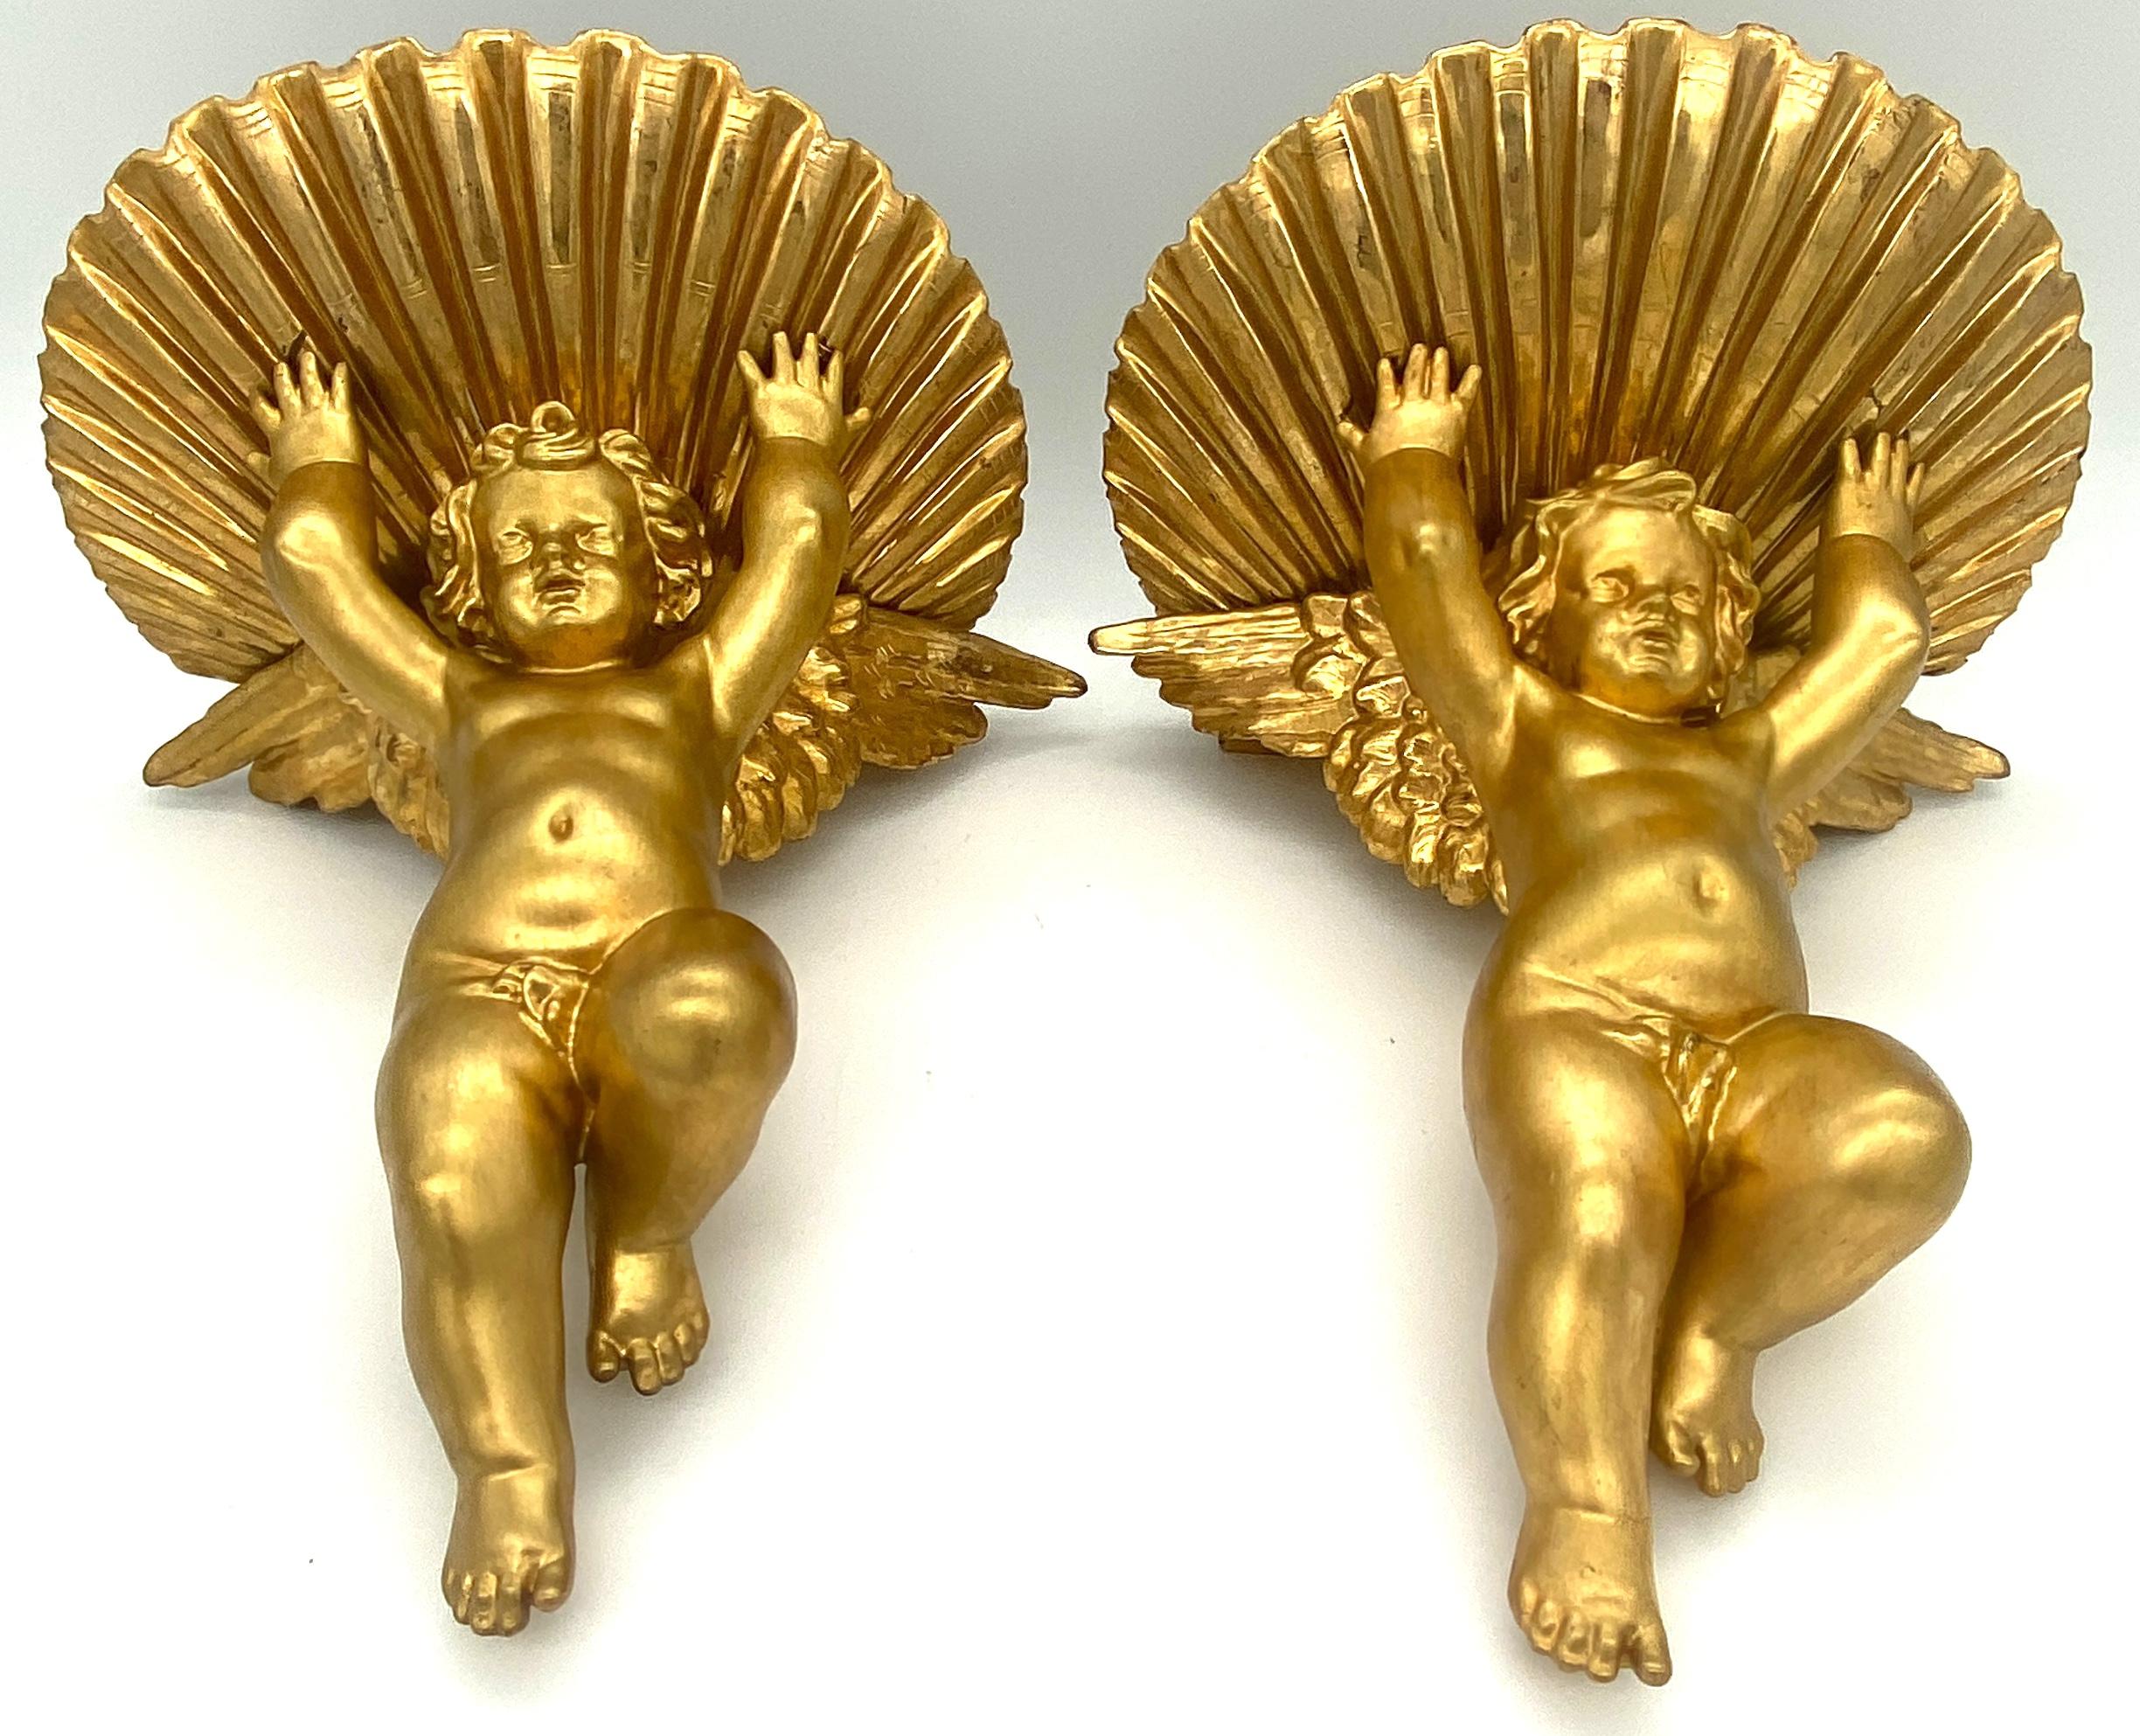 Hand-Carved Pair of 19th C. Italian Grotto Carved Giltwood Putti & Shell Wall Brackets For Sale